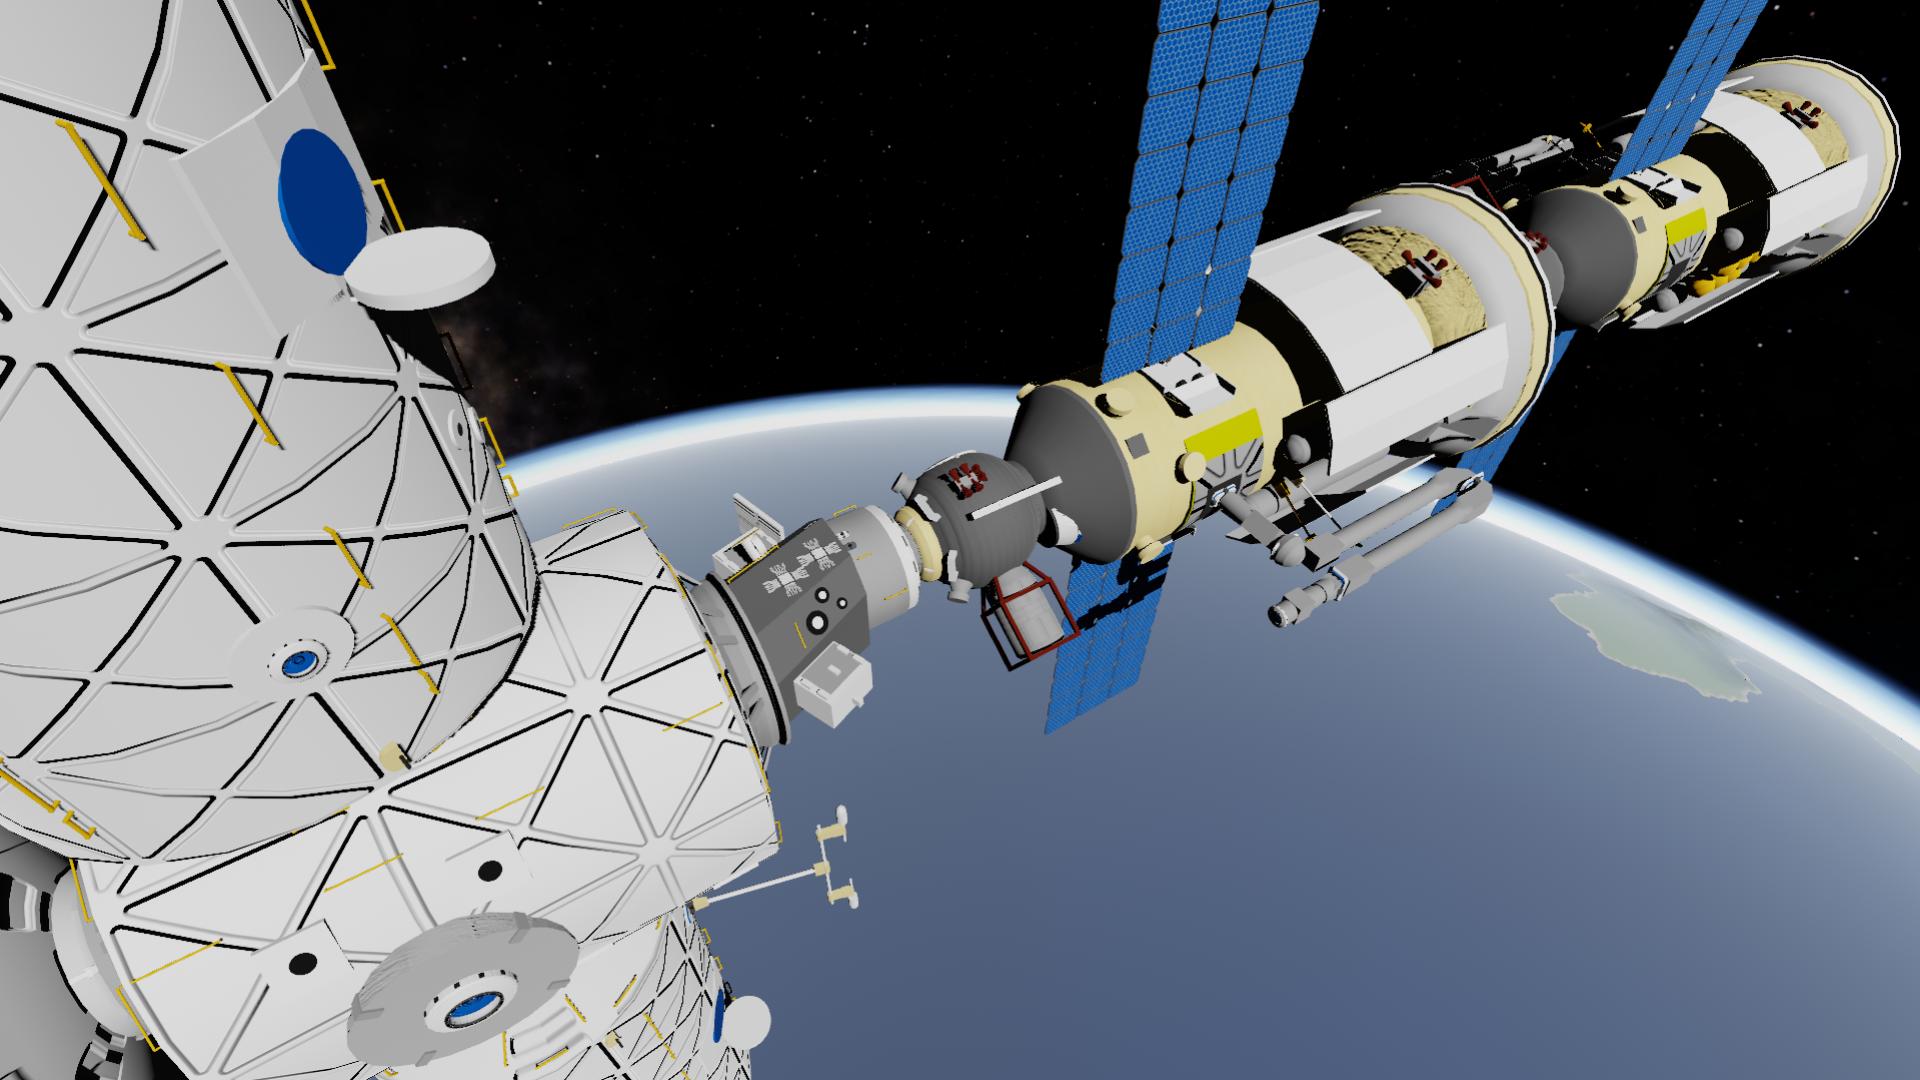 Unity module. Mg30fх iss2. The NASA Docking System.